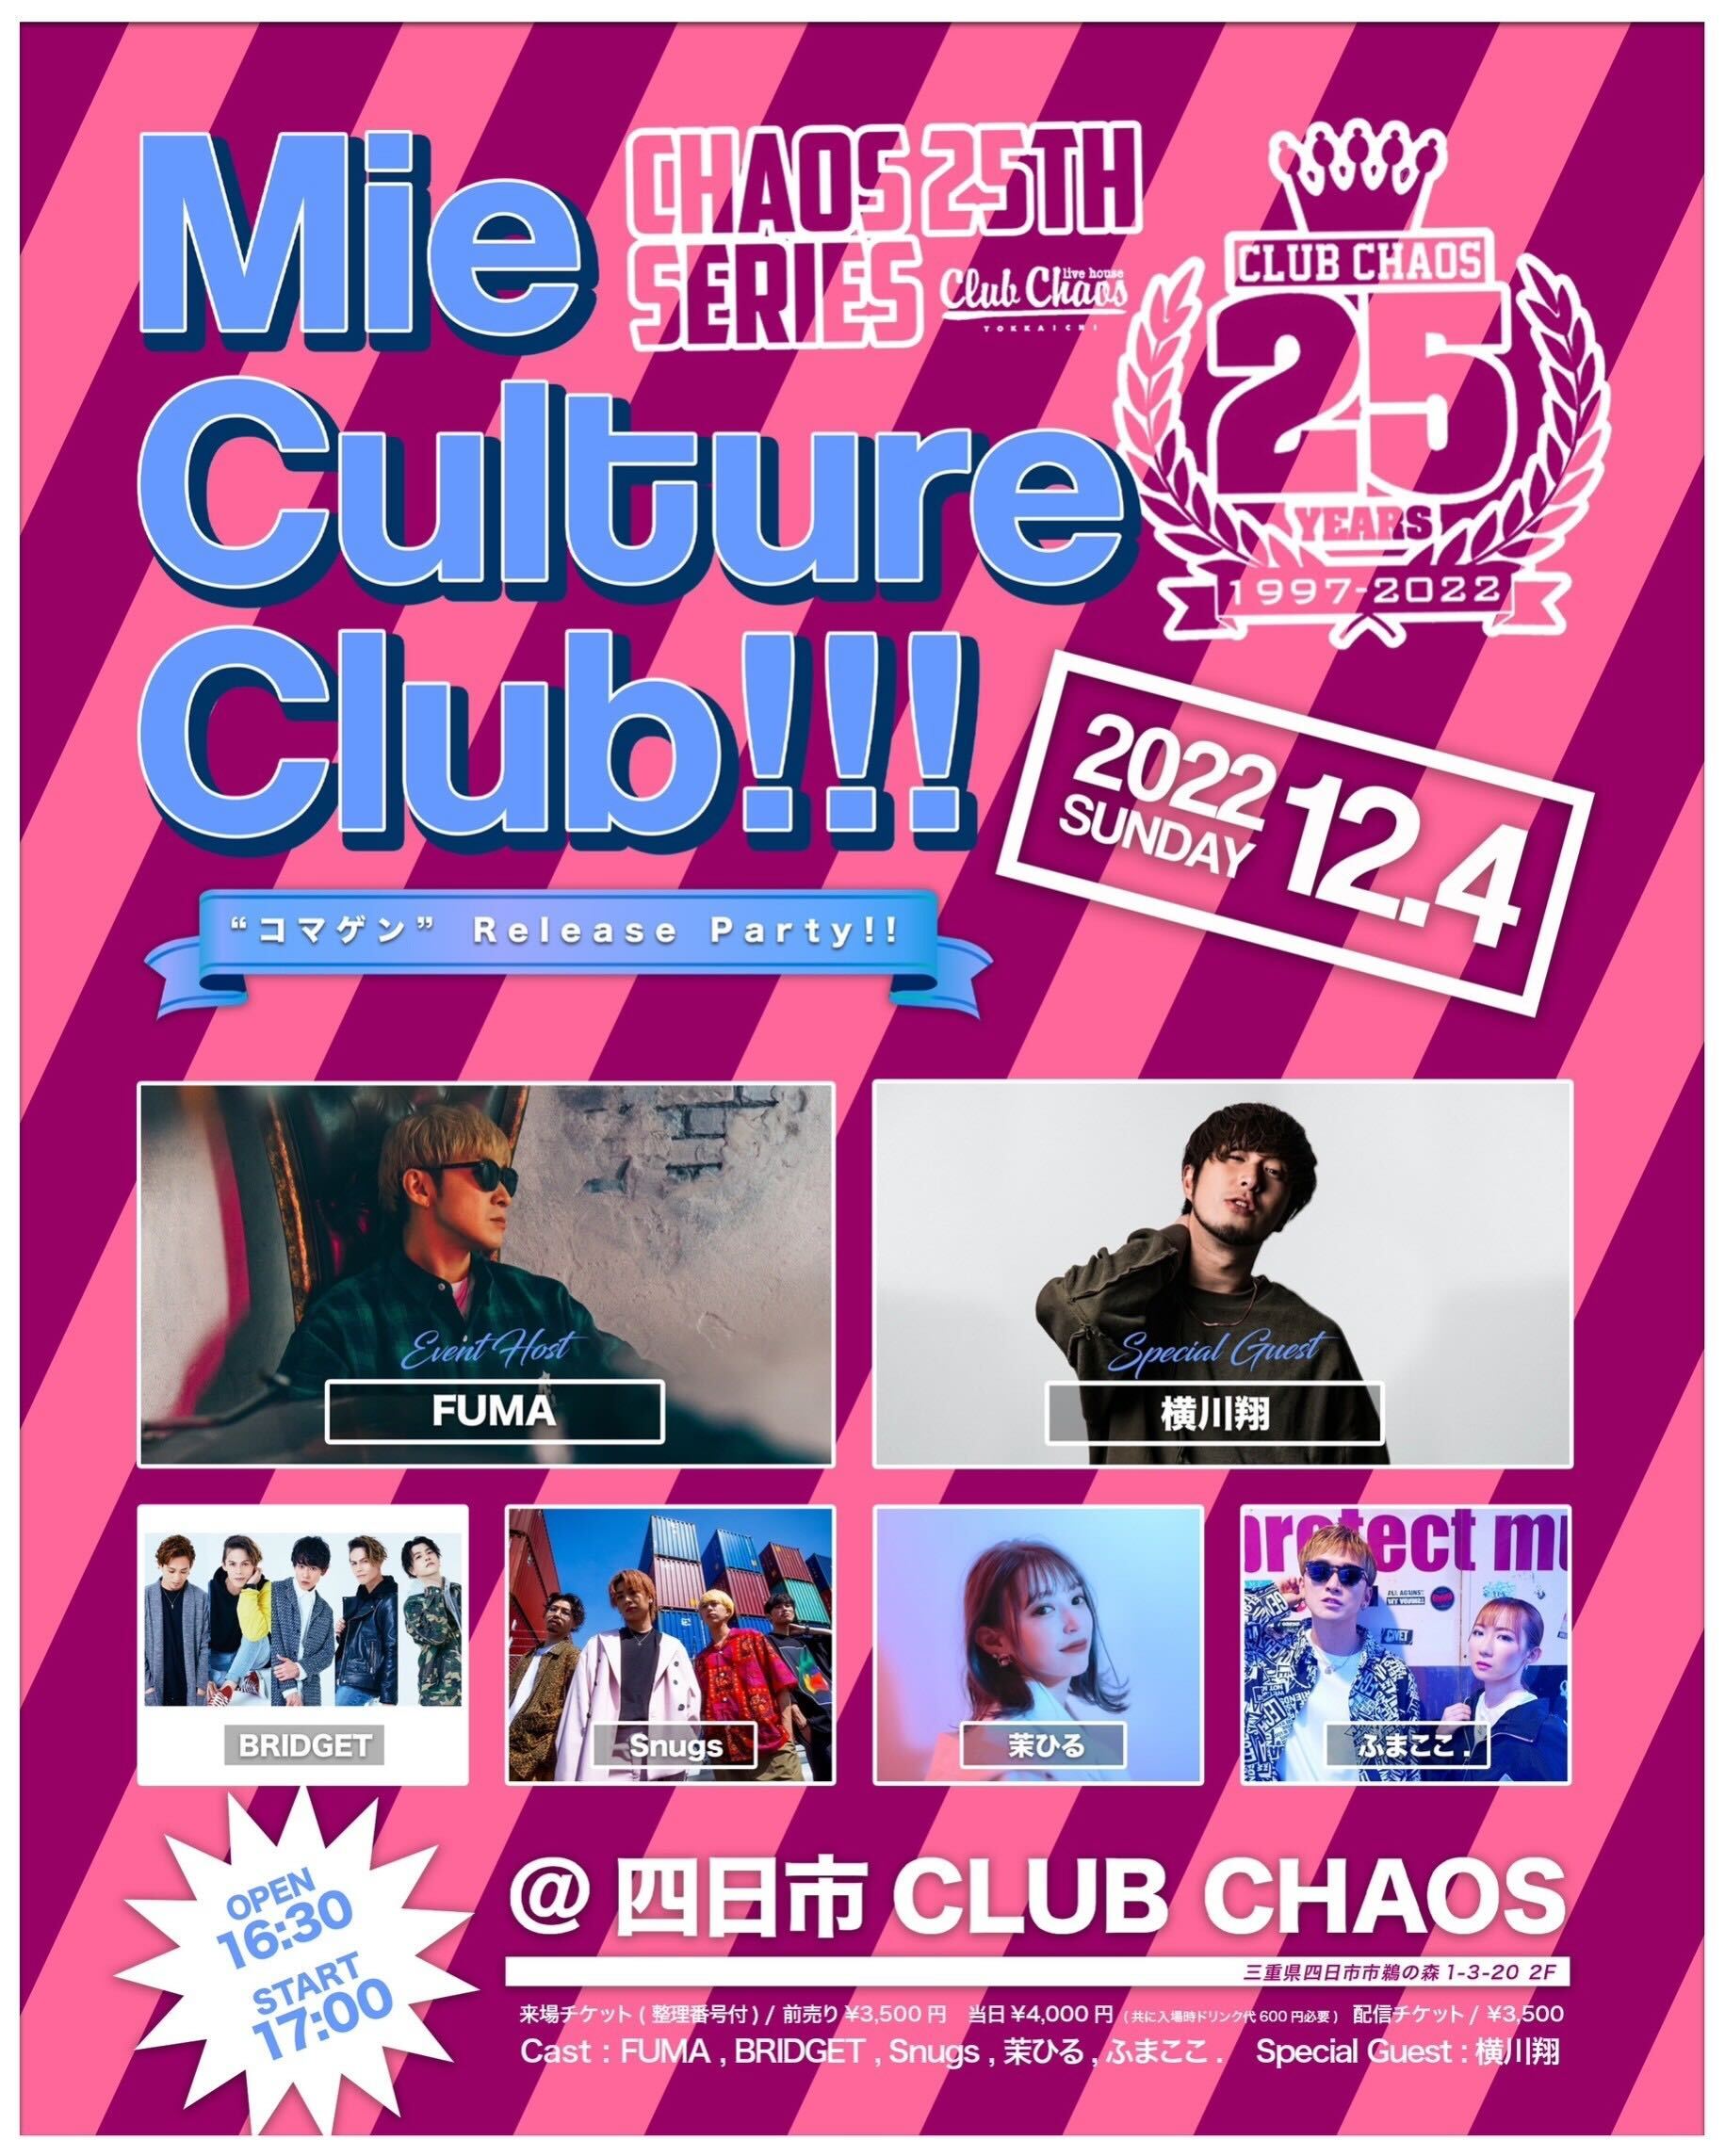 CLUB CHAOS 25th Anniversary<br>【Mie Culture Club!!!】<br>“コマゲン” Release Party!!